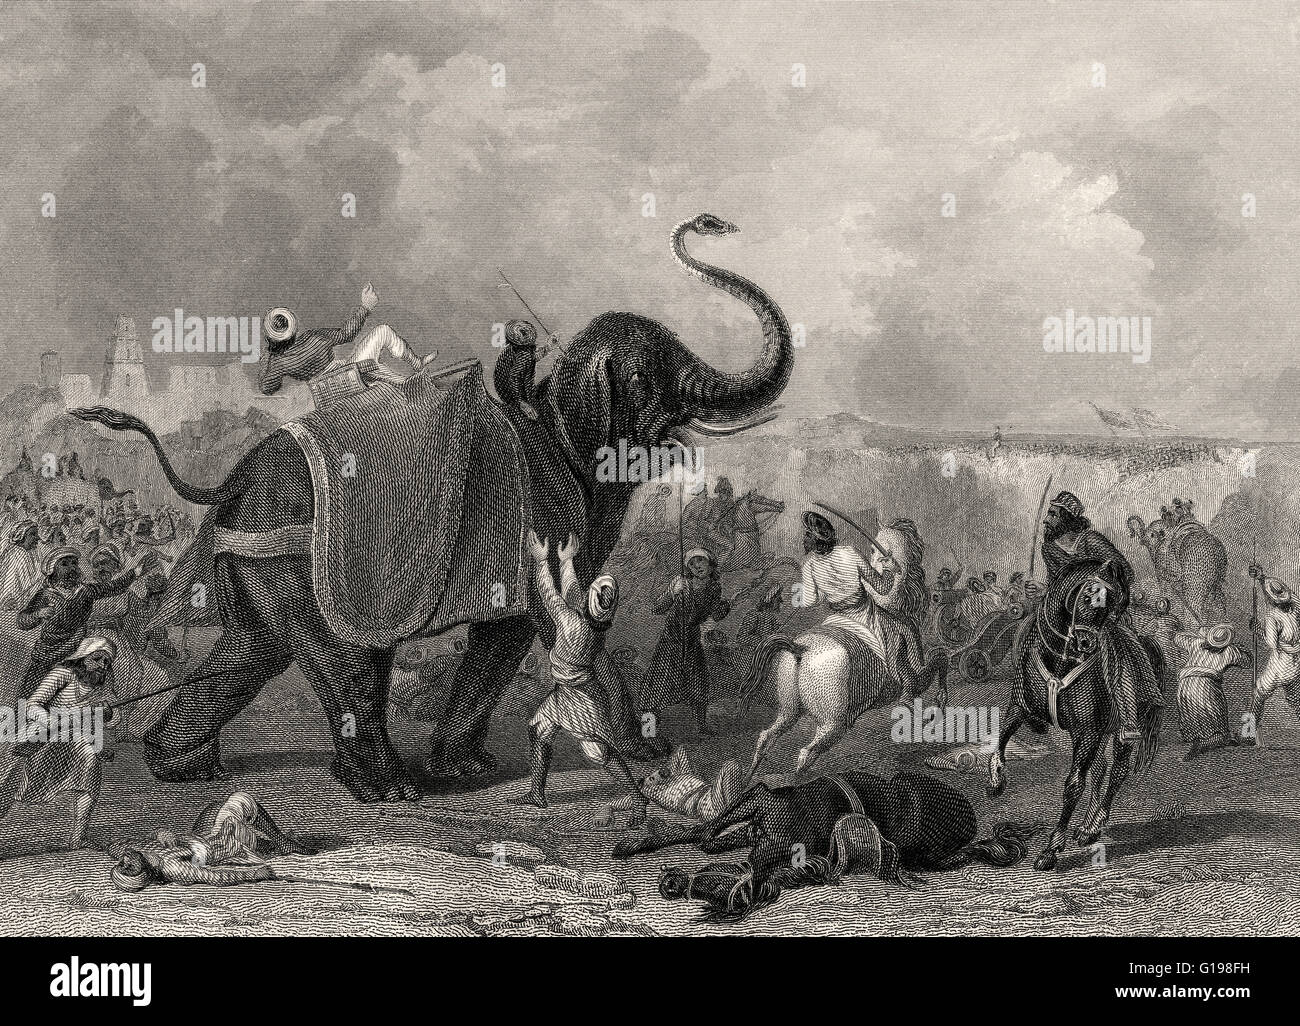 The Siege of Multan, India, 2nd Anglo-Sikh War, 1849 Stock Photo